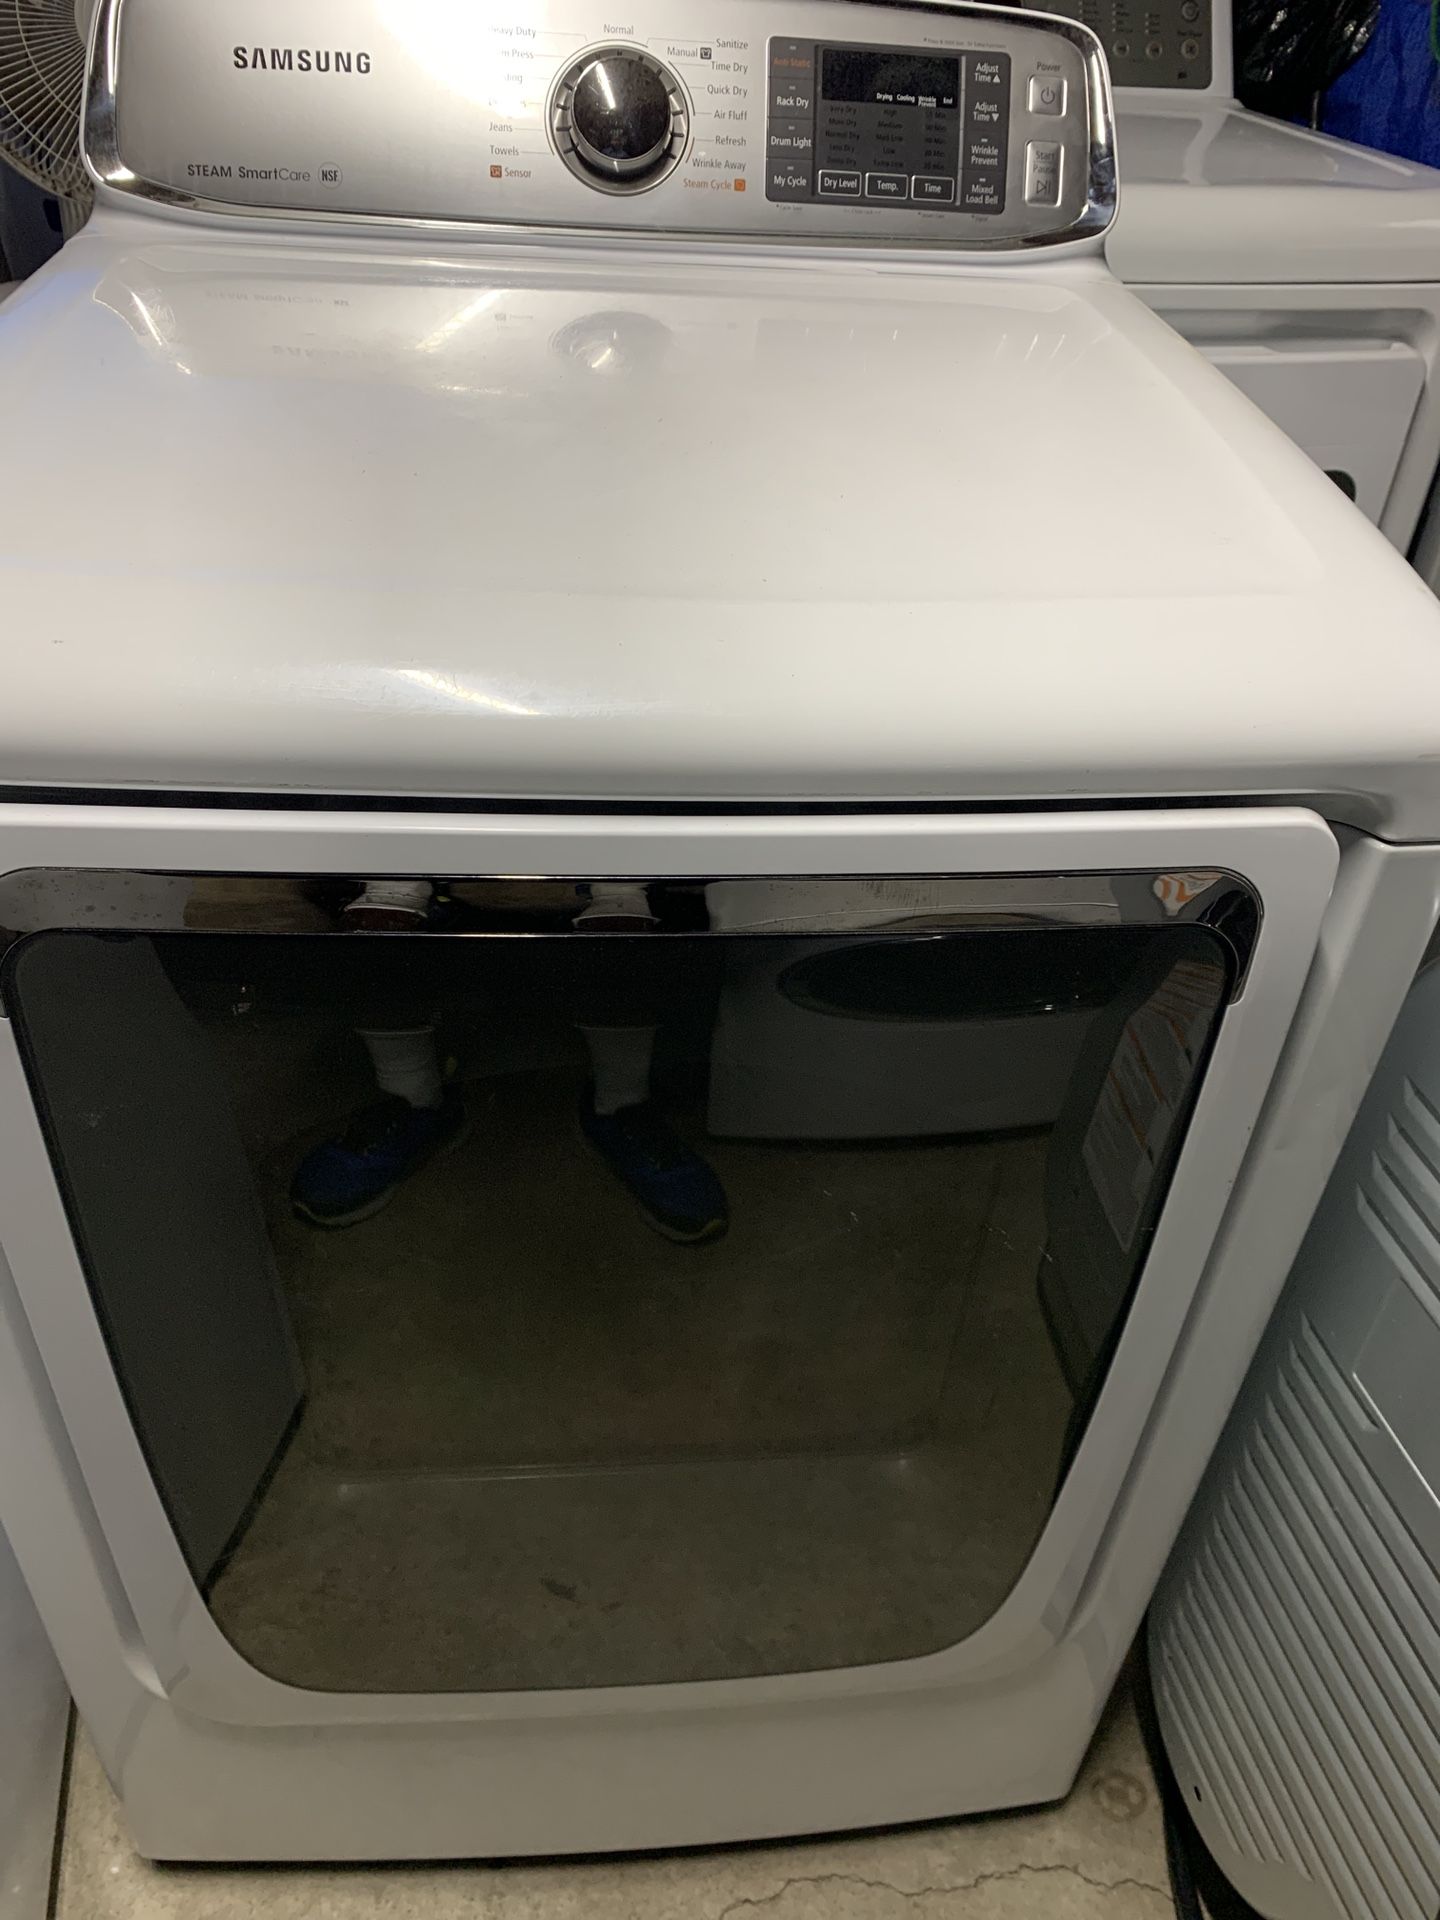 Samsung dryer from Scratch and dent section all most brand new